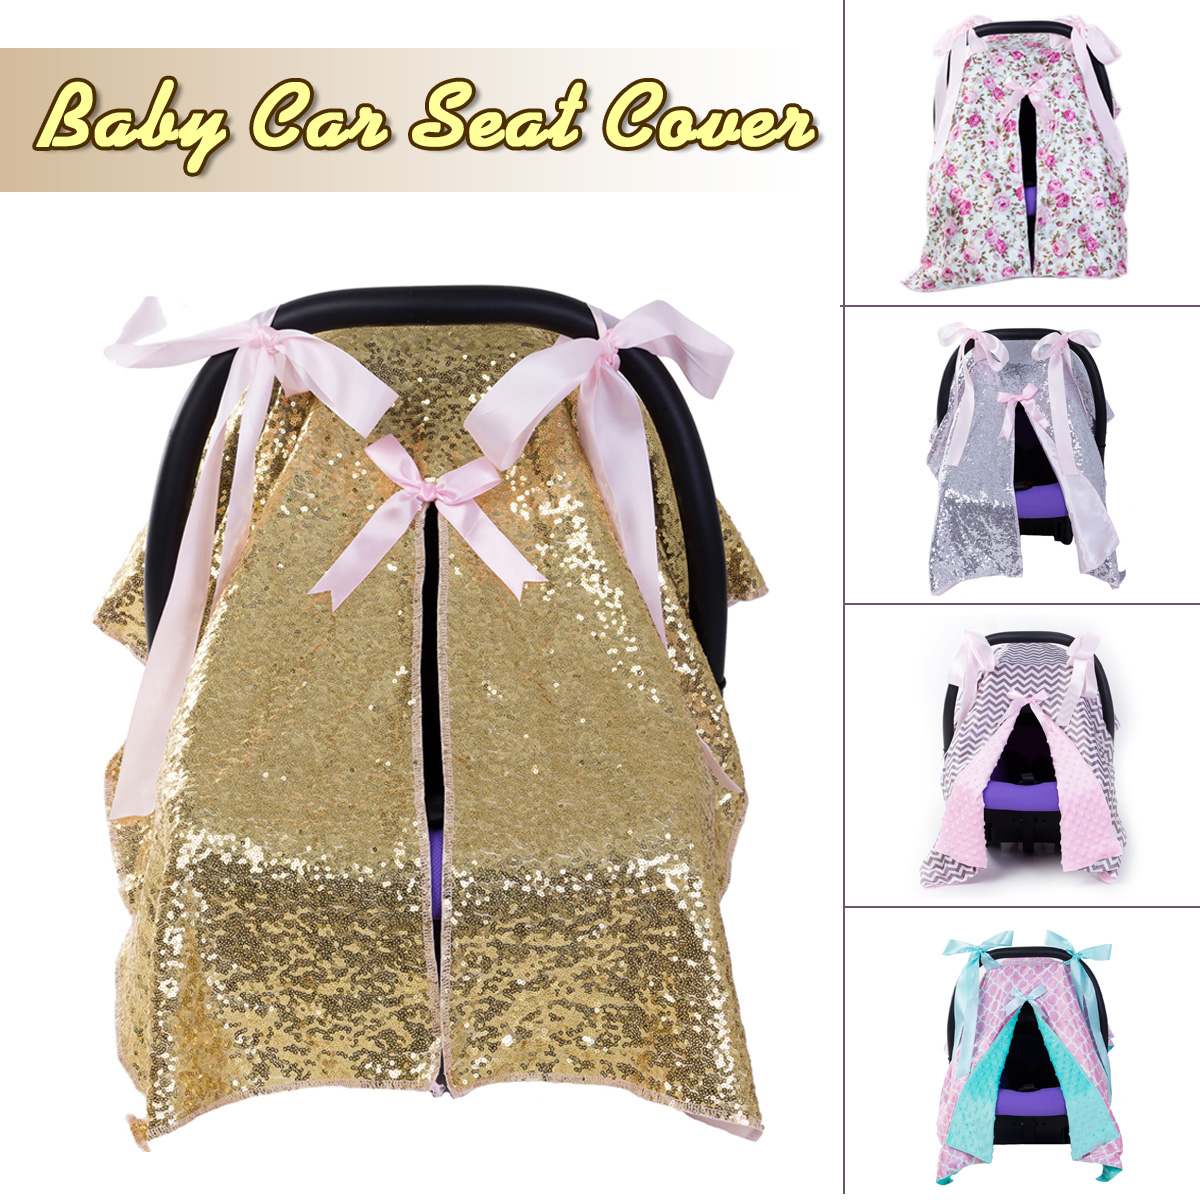 NEW Baby Car Seat Blanket Cover Fashion Bow Newborn Baby Girls Soft Safety Car Seat Canopy Nursing Cover Multi-use Blanket Cover